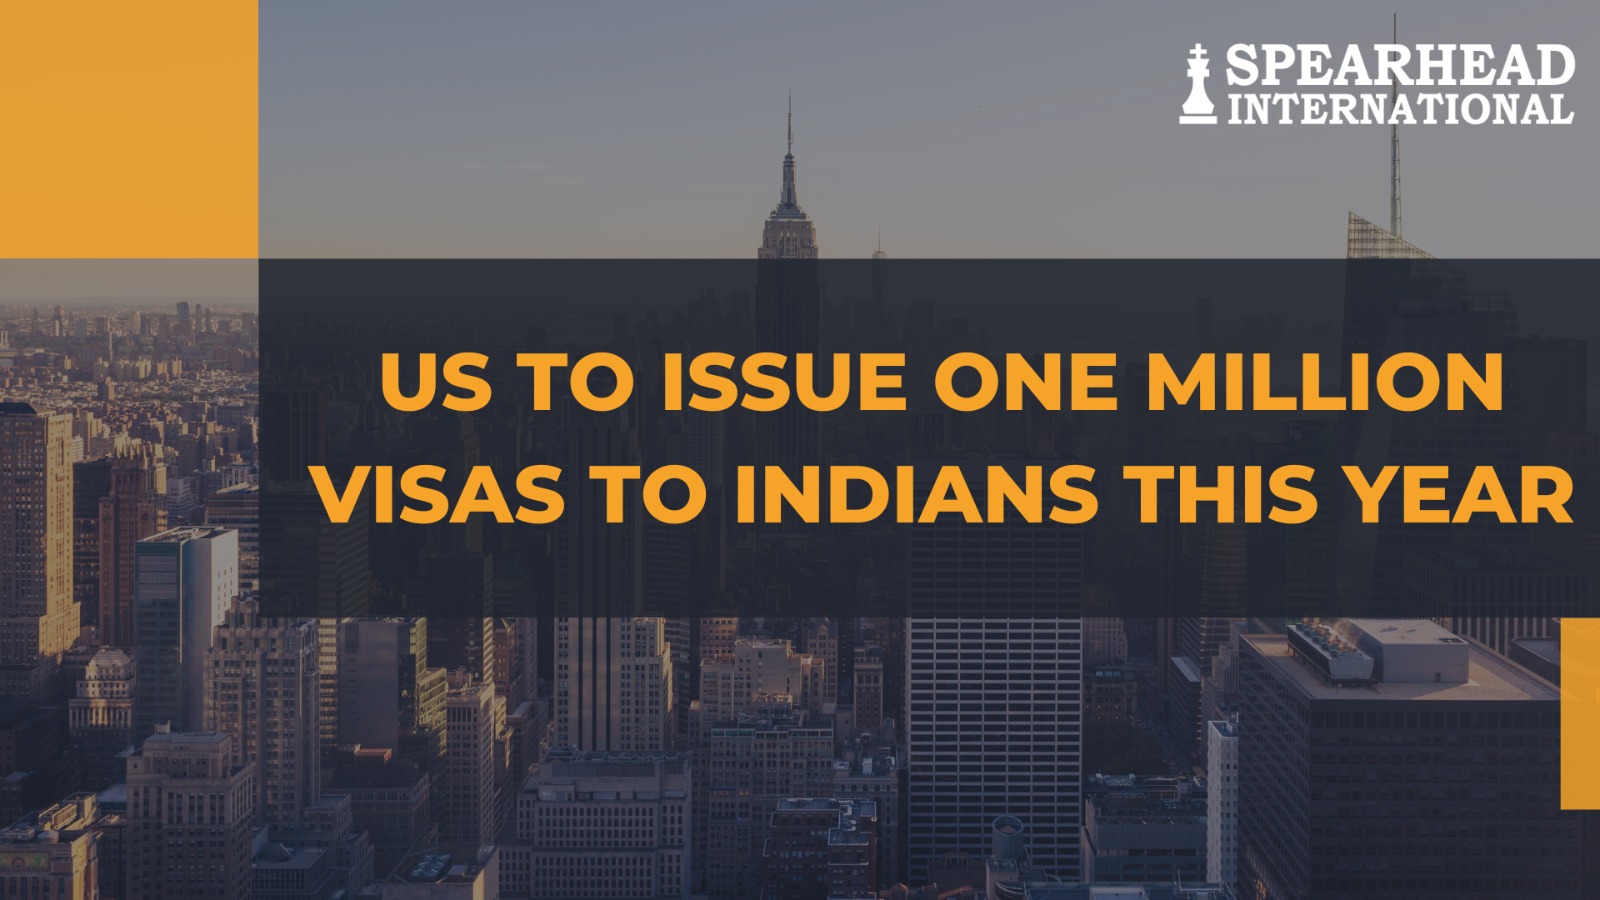 Indians will receive 1 million visas from the US this year